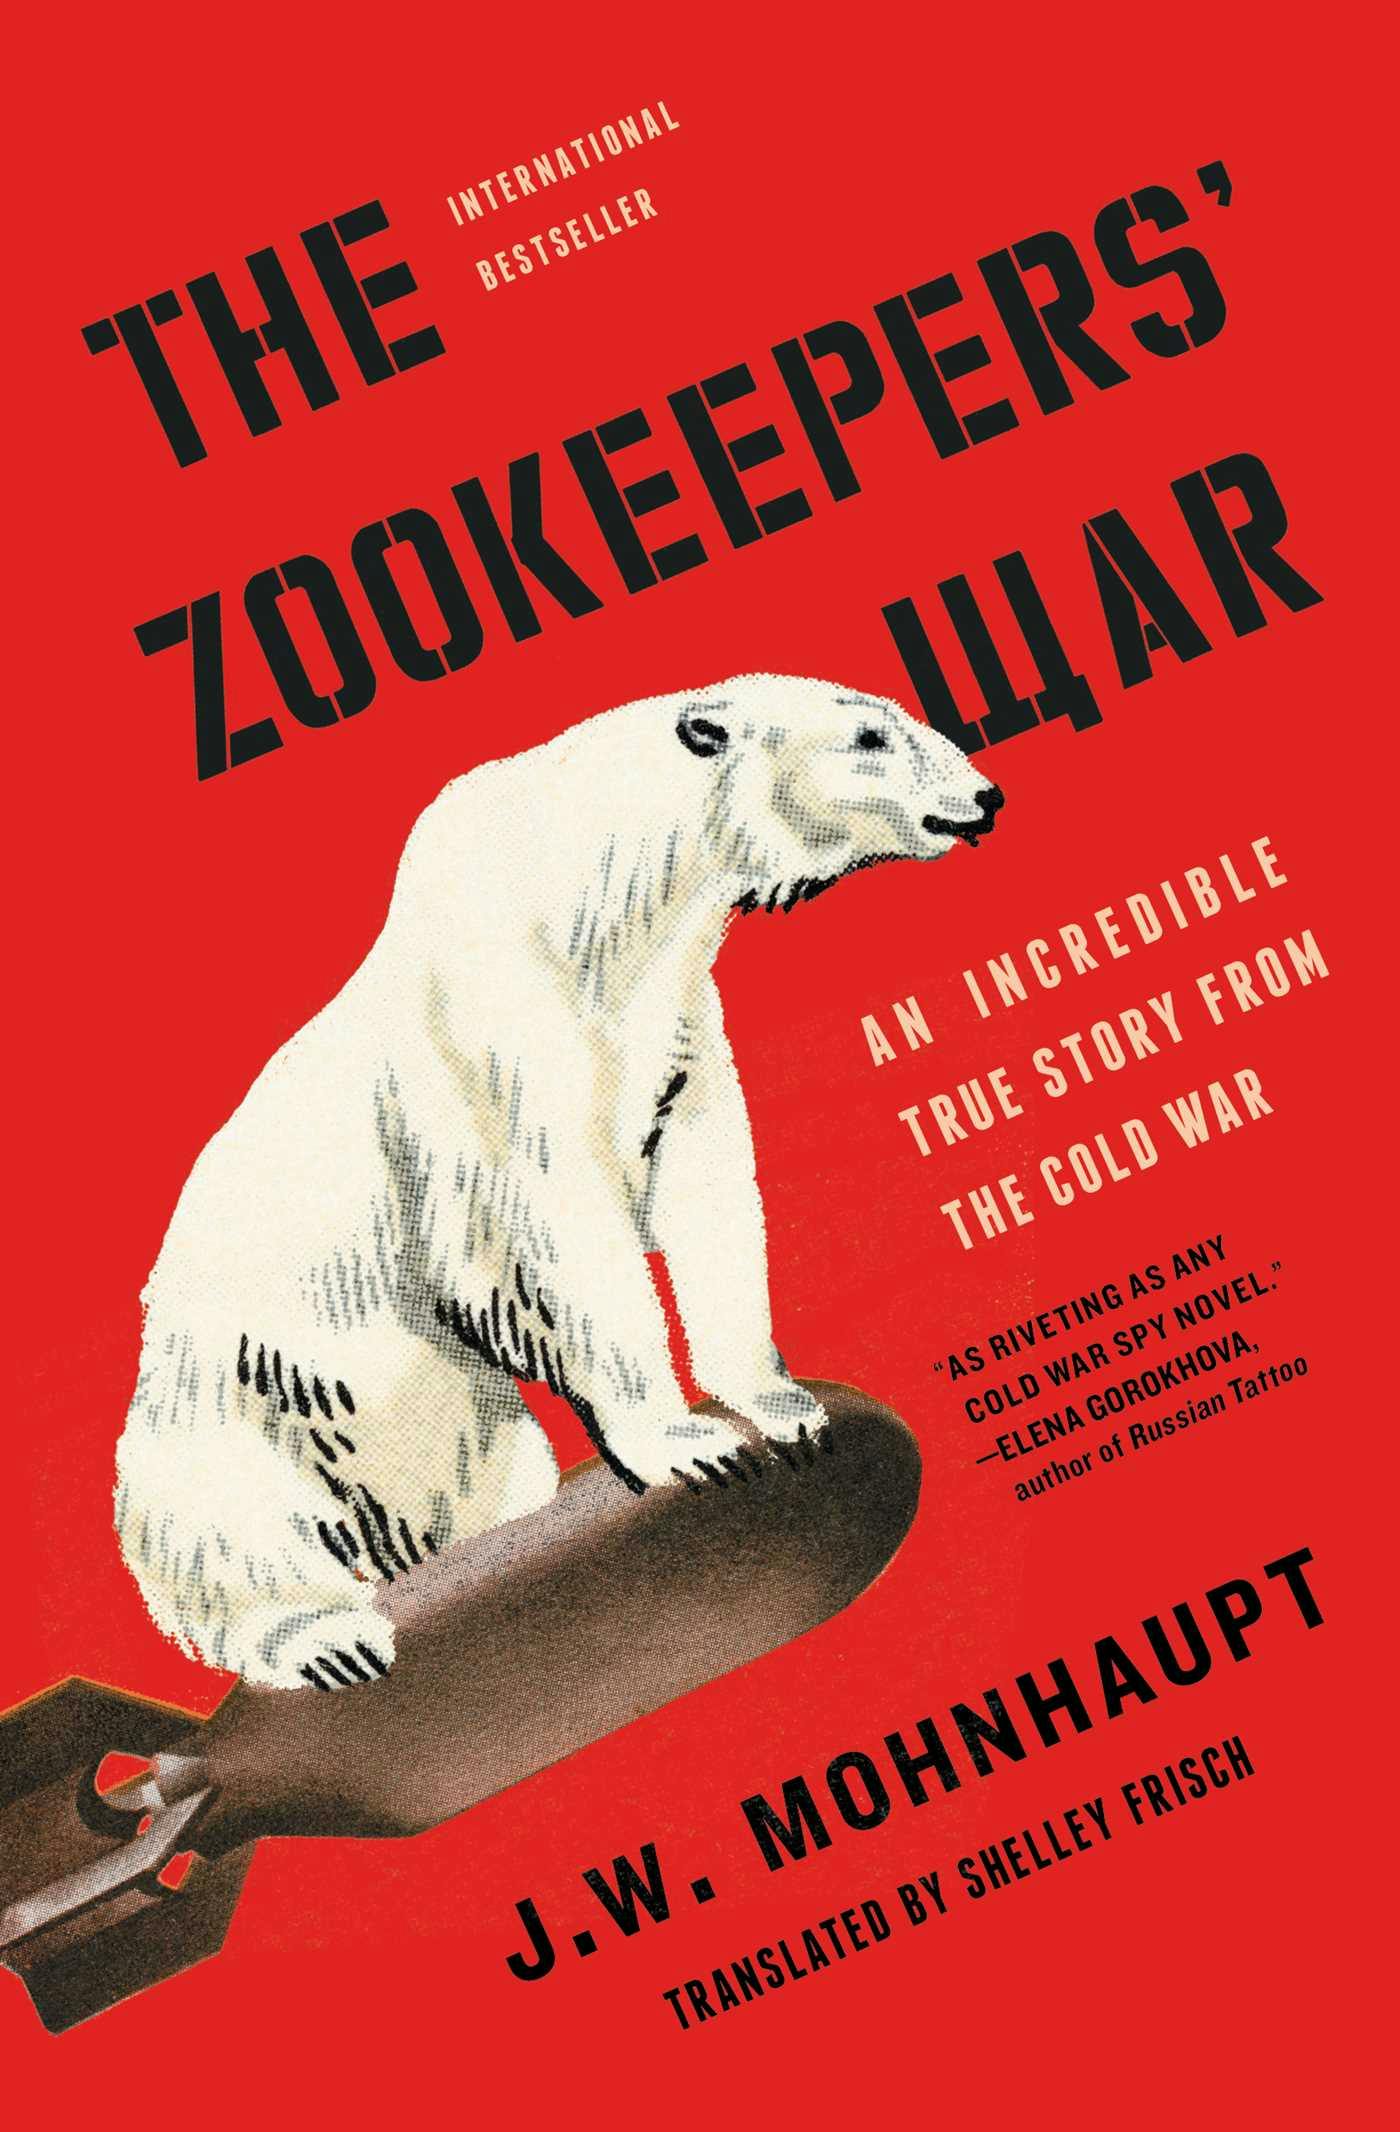 The Zookeepers' War: An Incredible True Story from the Cold War - J.W. Mohnhaupt